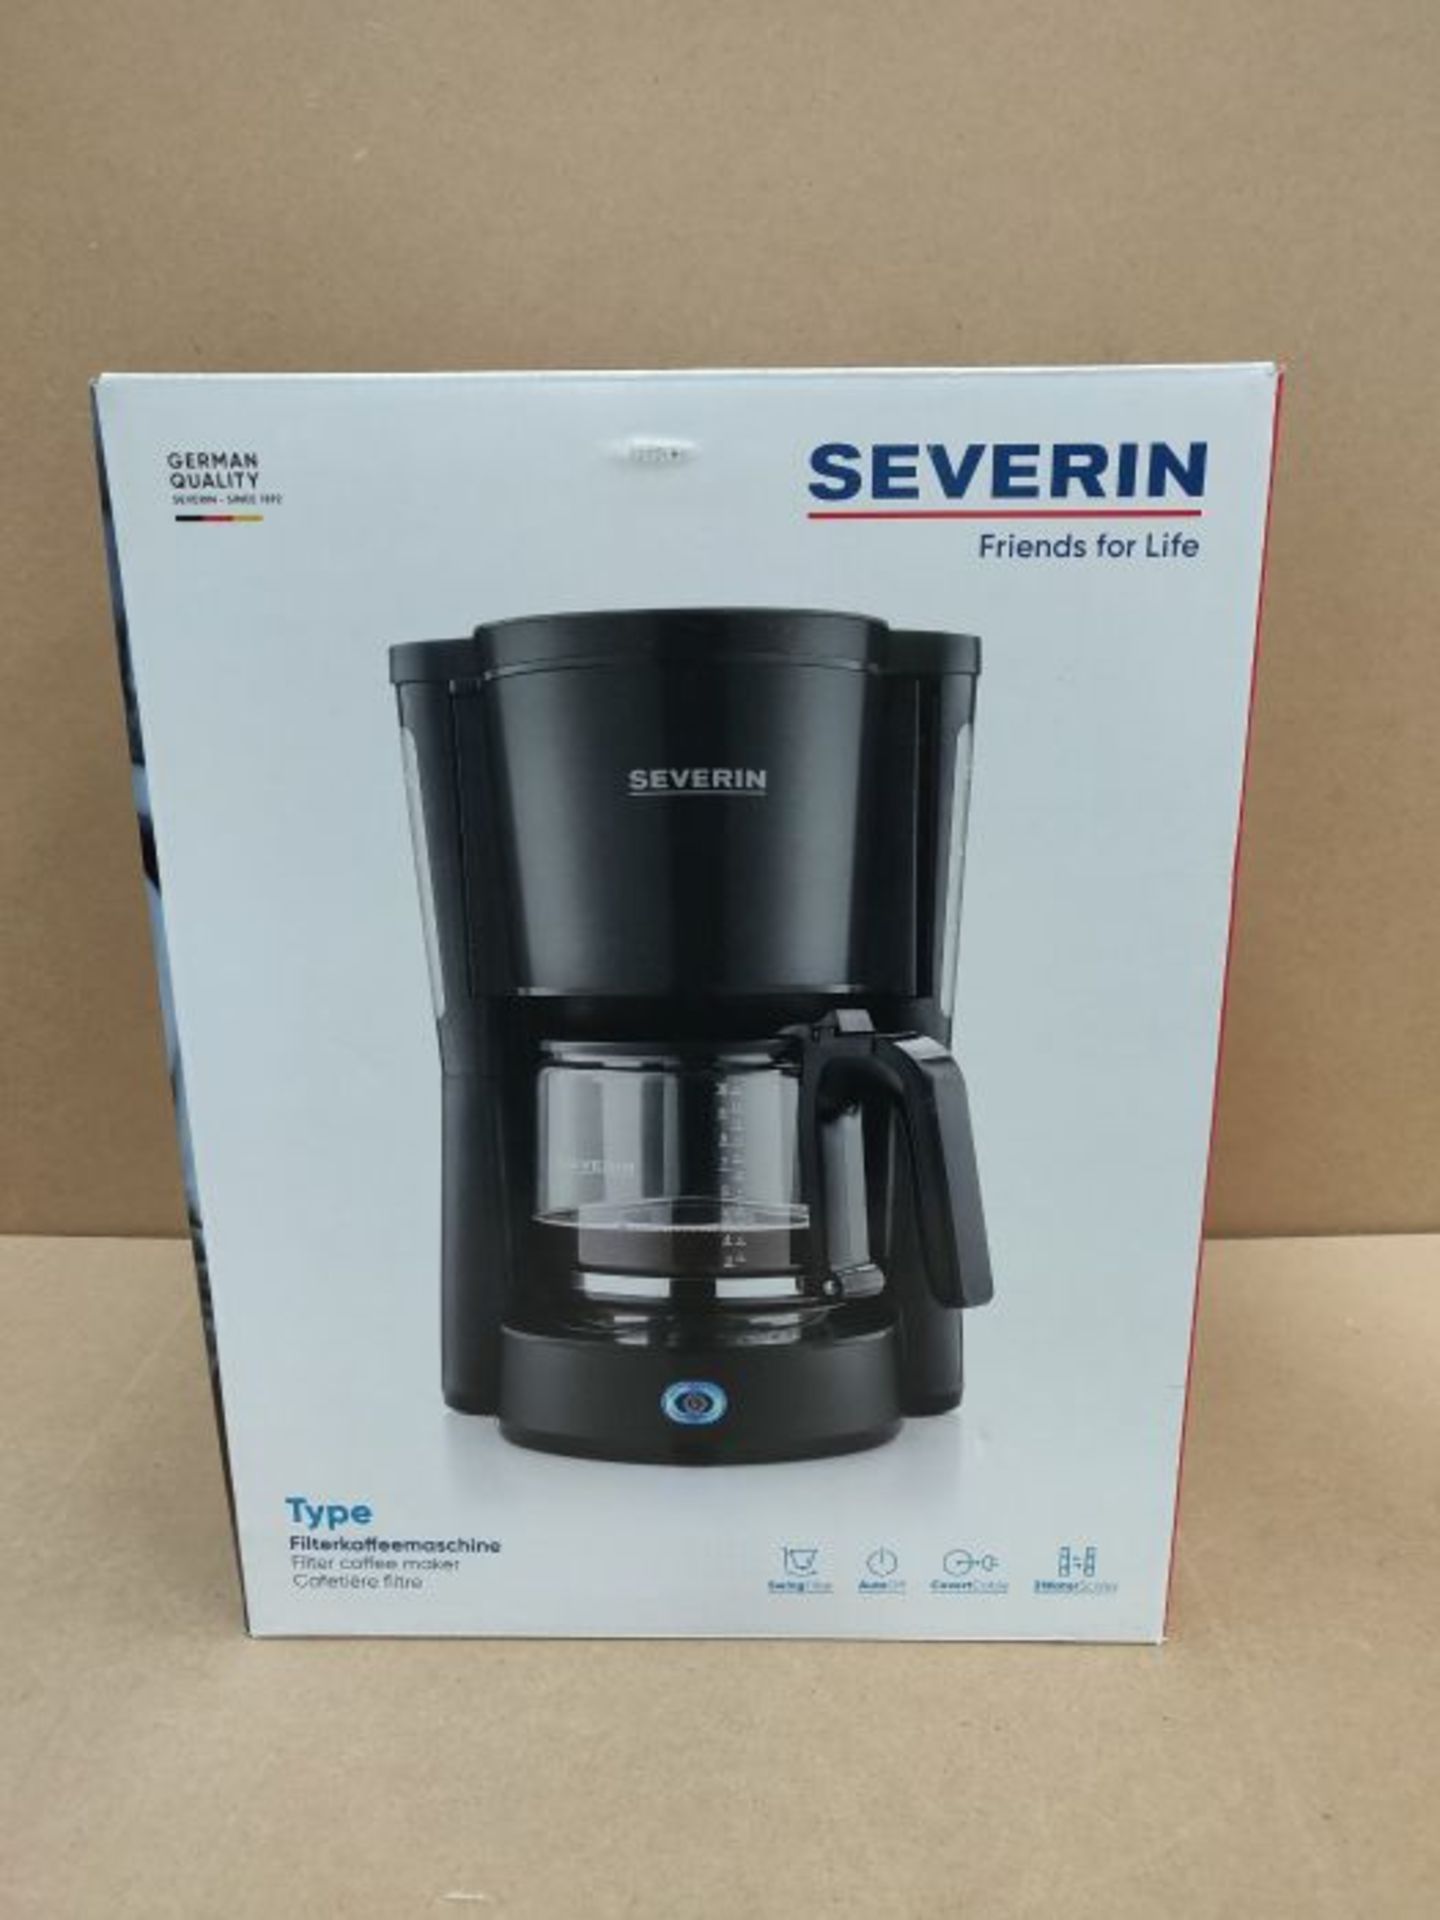 Severin Coffee Maker with 1000 W of Power KA 4815, Black - Image 2 of 3